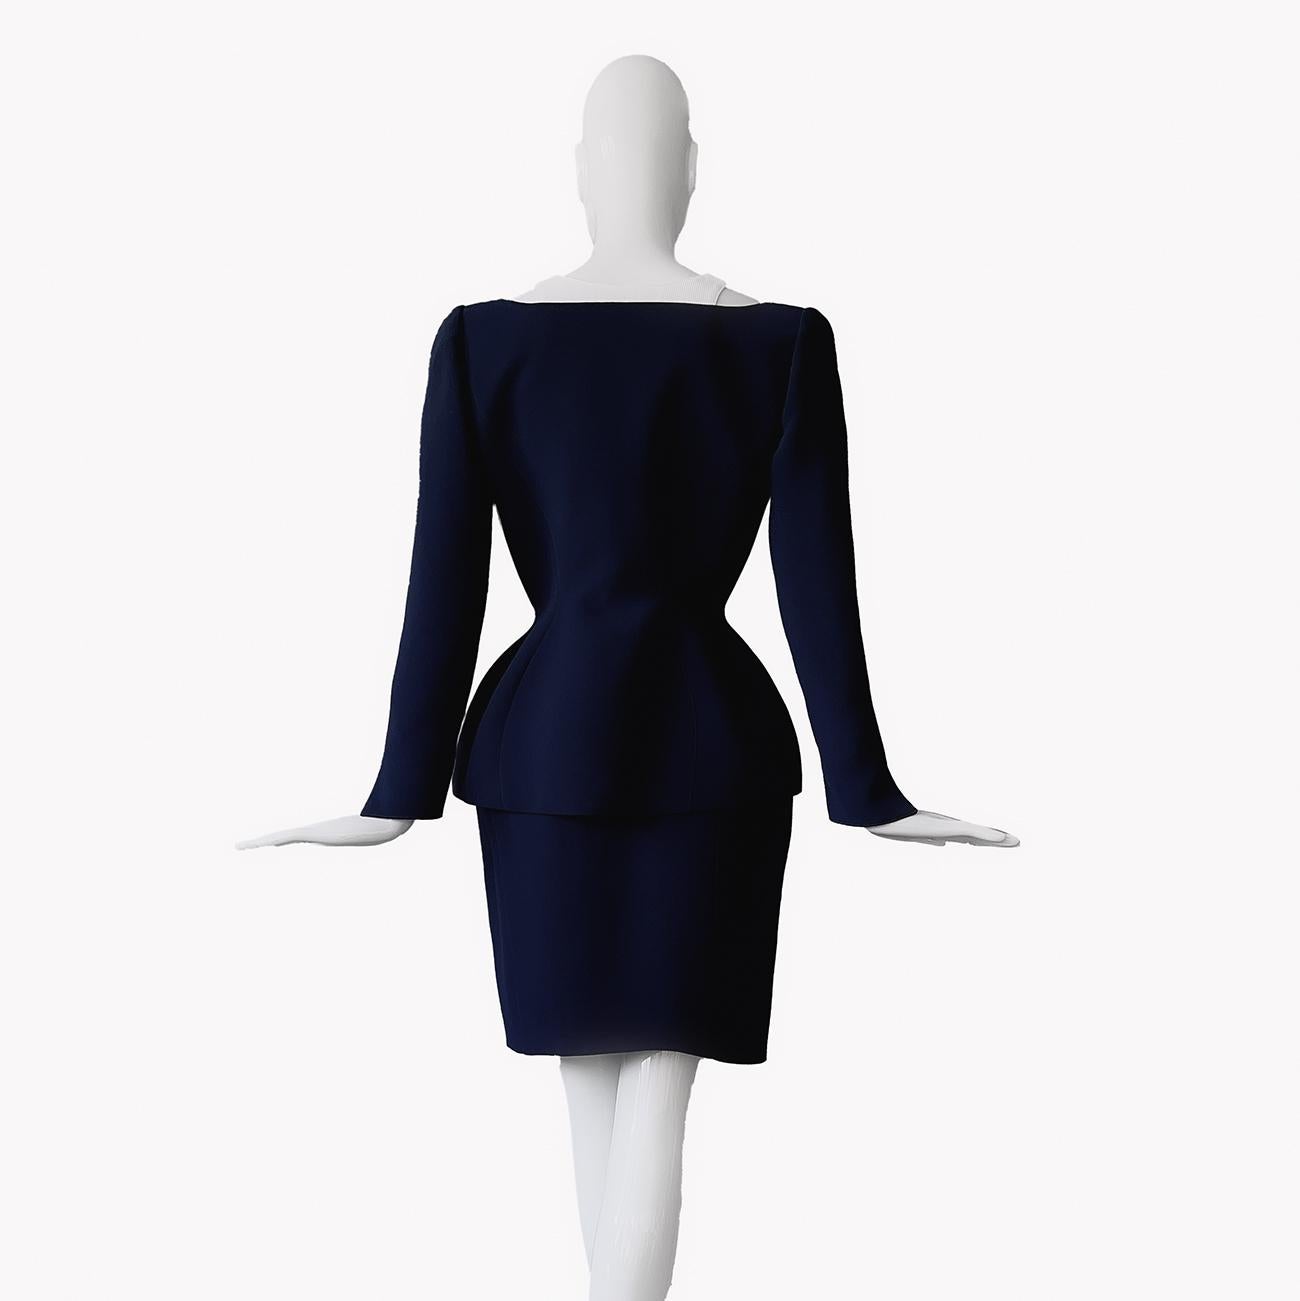 Thierry Mugler Spirng 1999 Runway Sculptural Ensemble Jacket Skirt Suit  In Excellent Condition For Sale In Berlin, BE